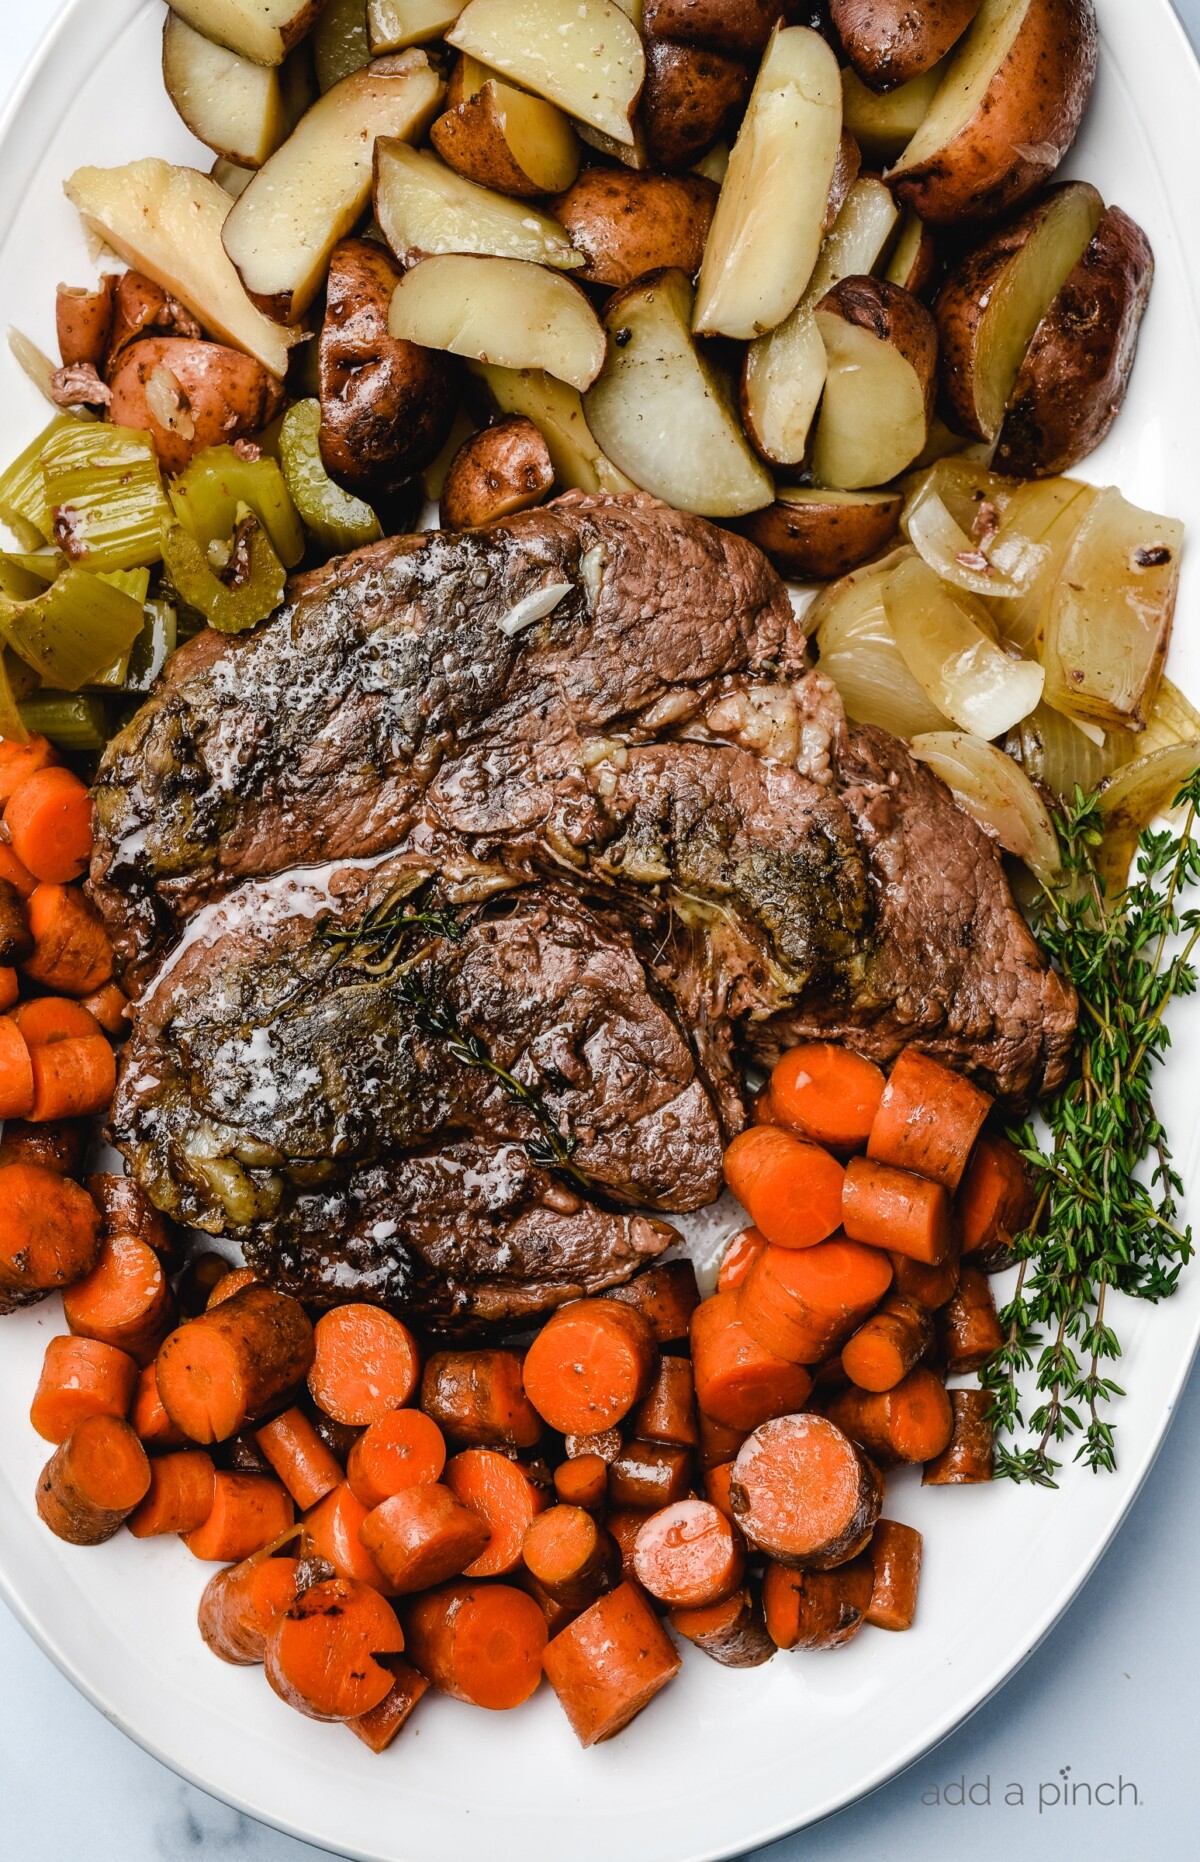 Photograph of cooked roast surrounded by potatoes, onions, fresh thyme, and carrots on a white platter. // addapinch.com